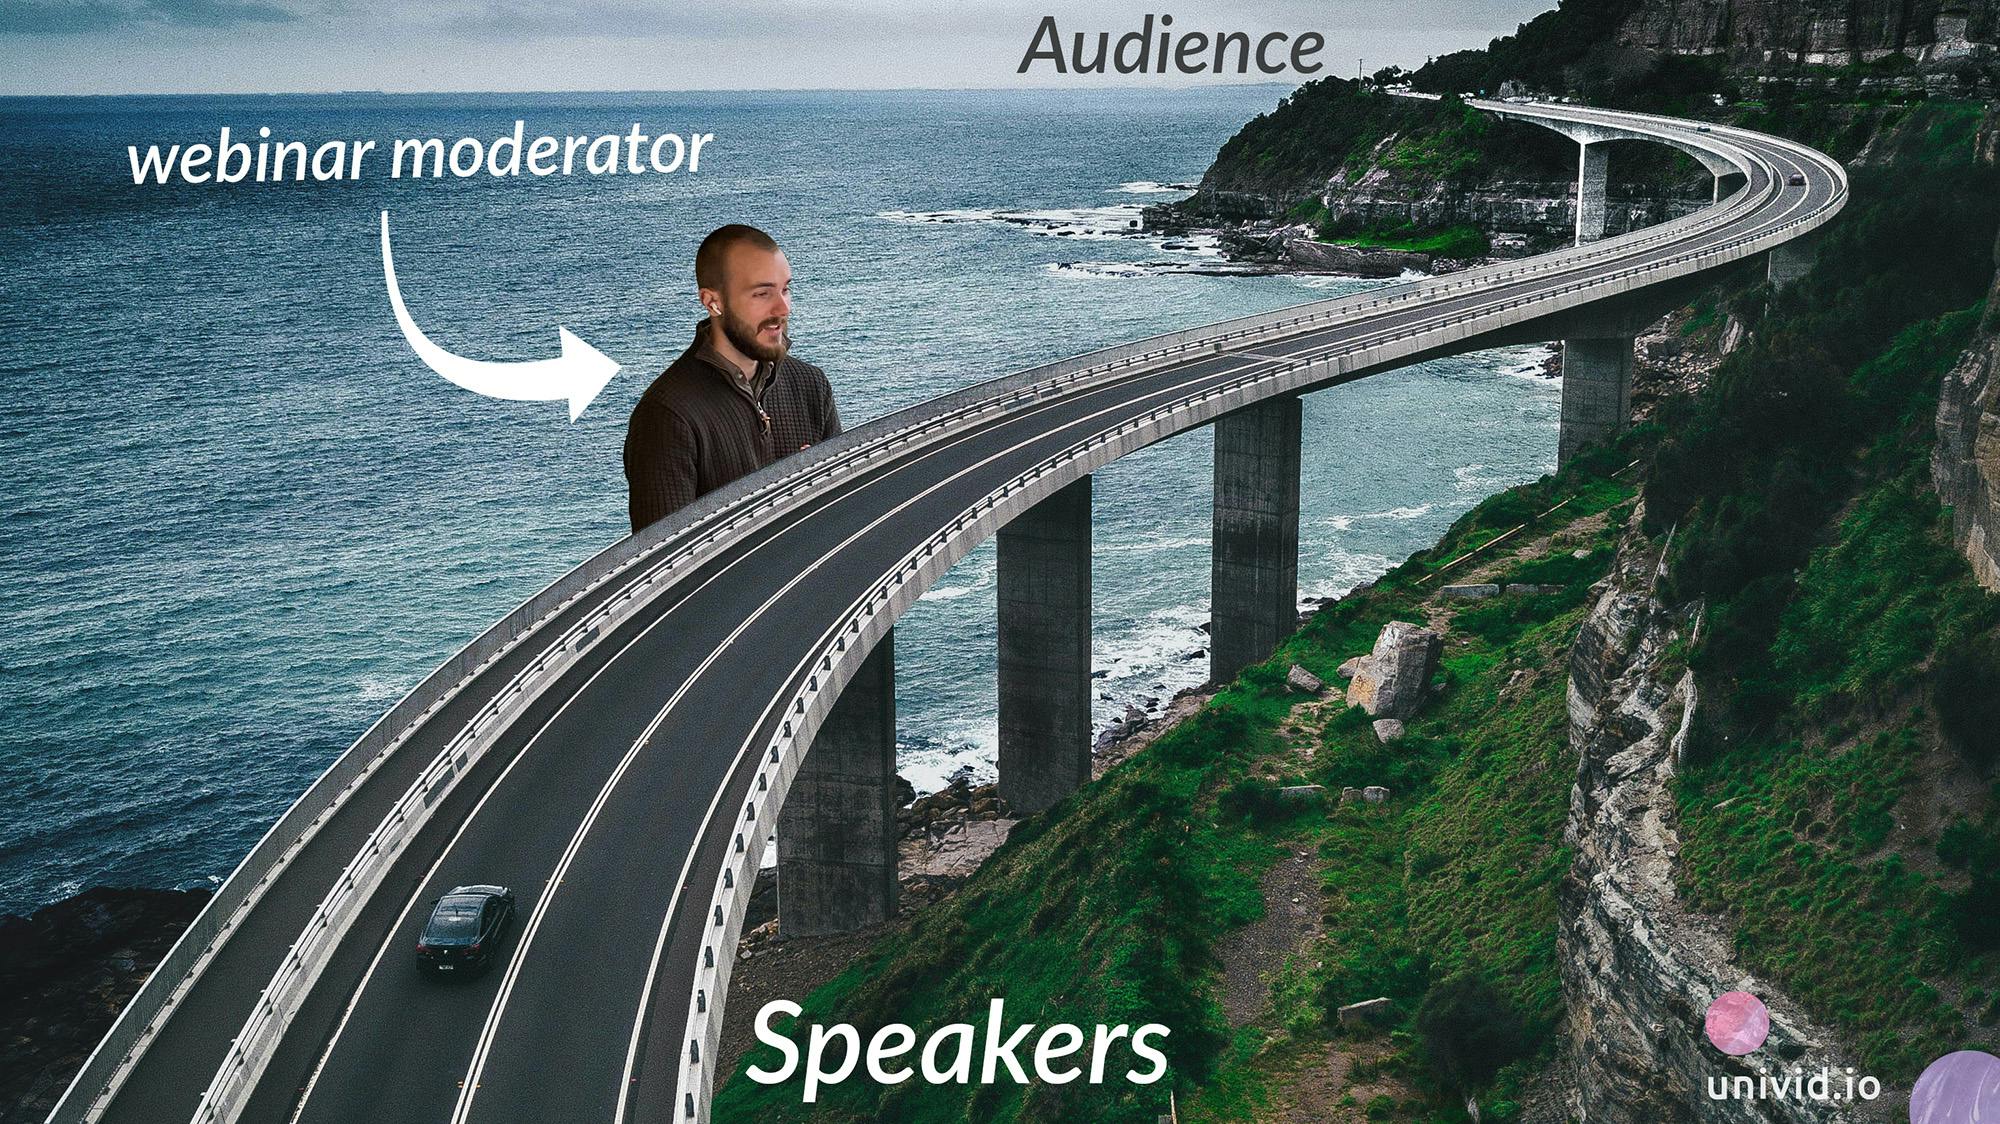 Webinar moderator connecting audience and speakers